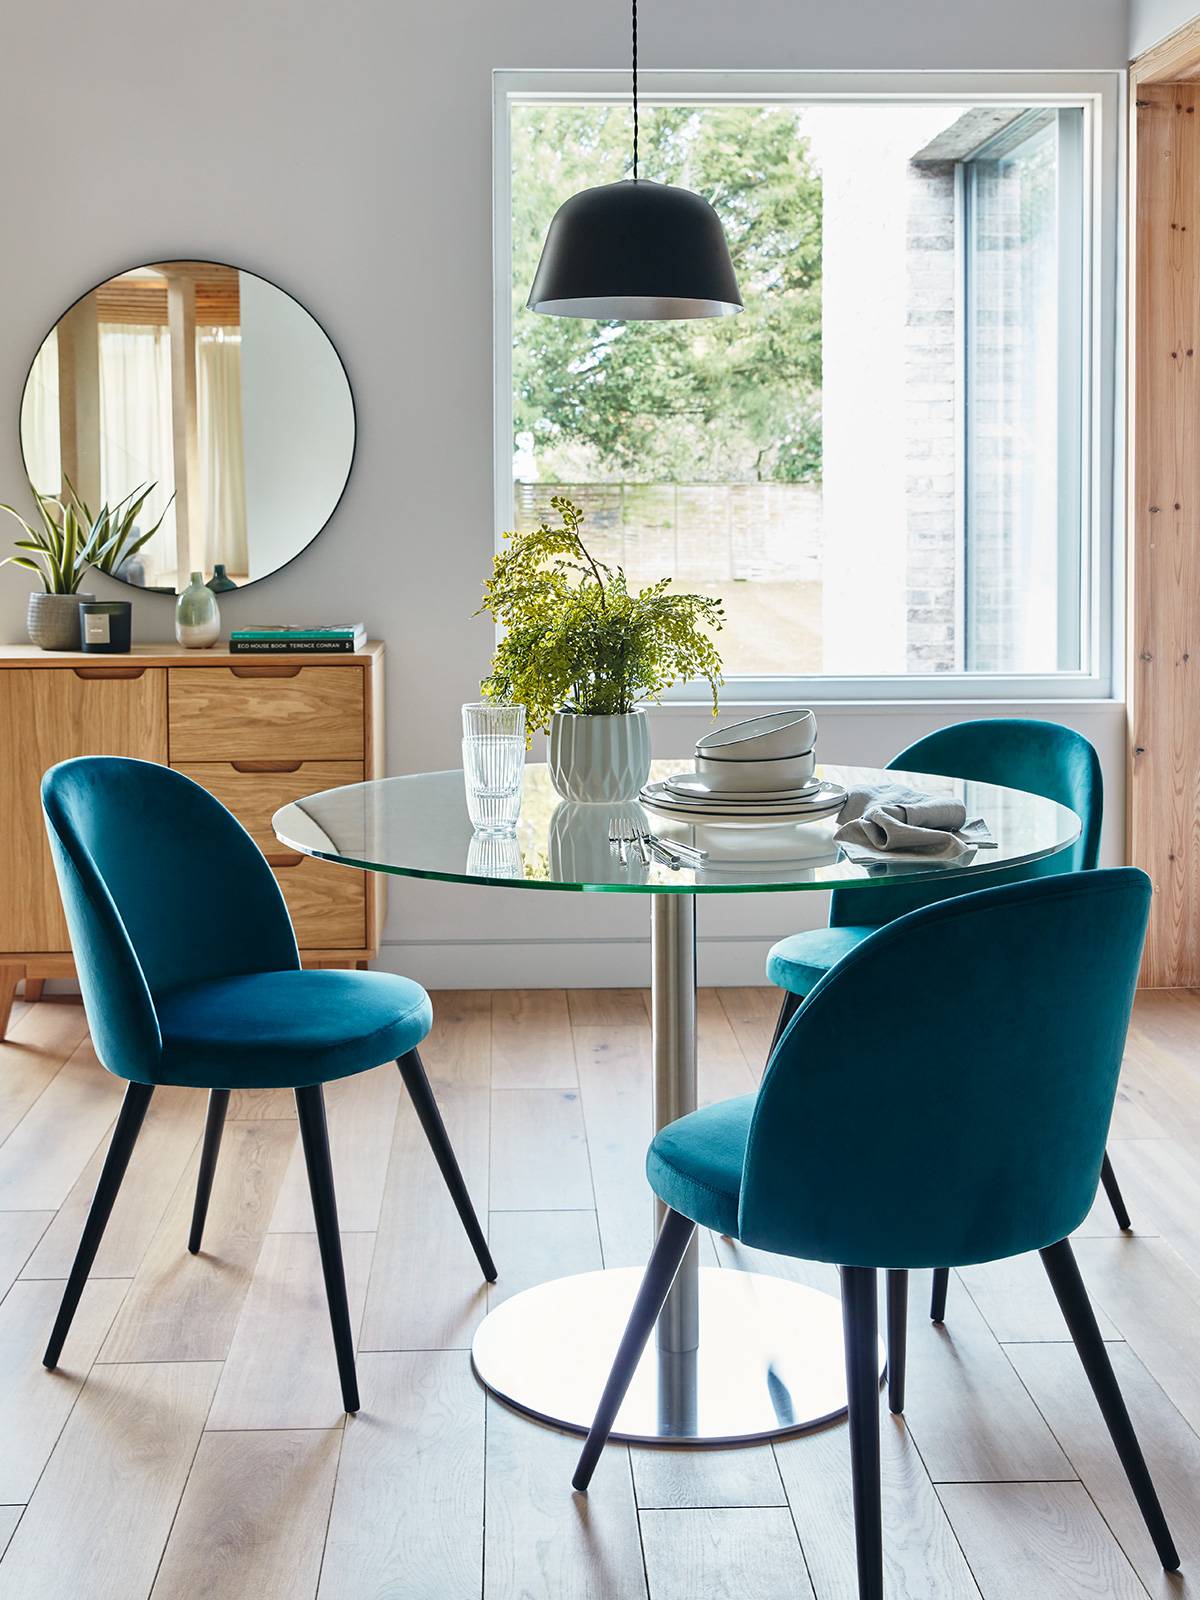 Dining Room Furniture Ideas For The, Round Breakfast Tables And Chairs